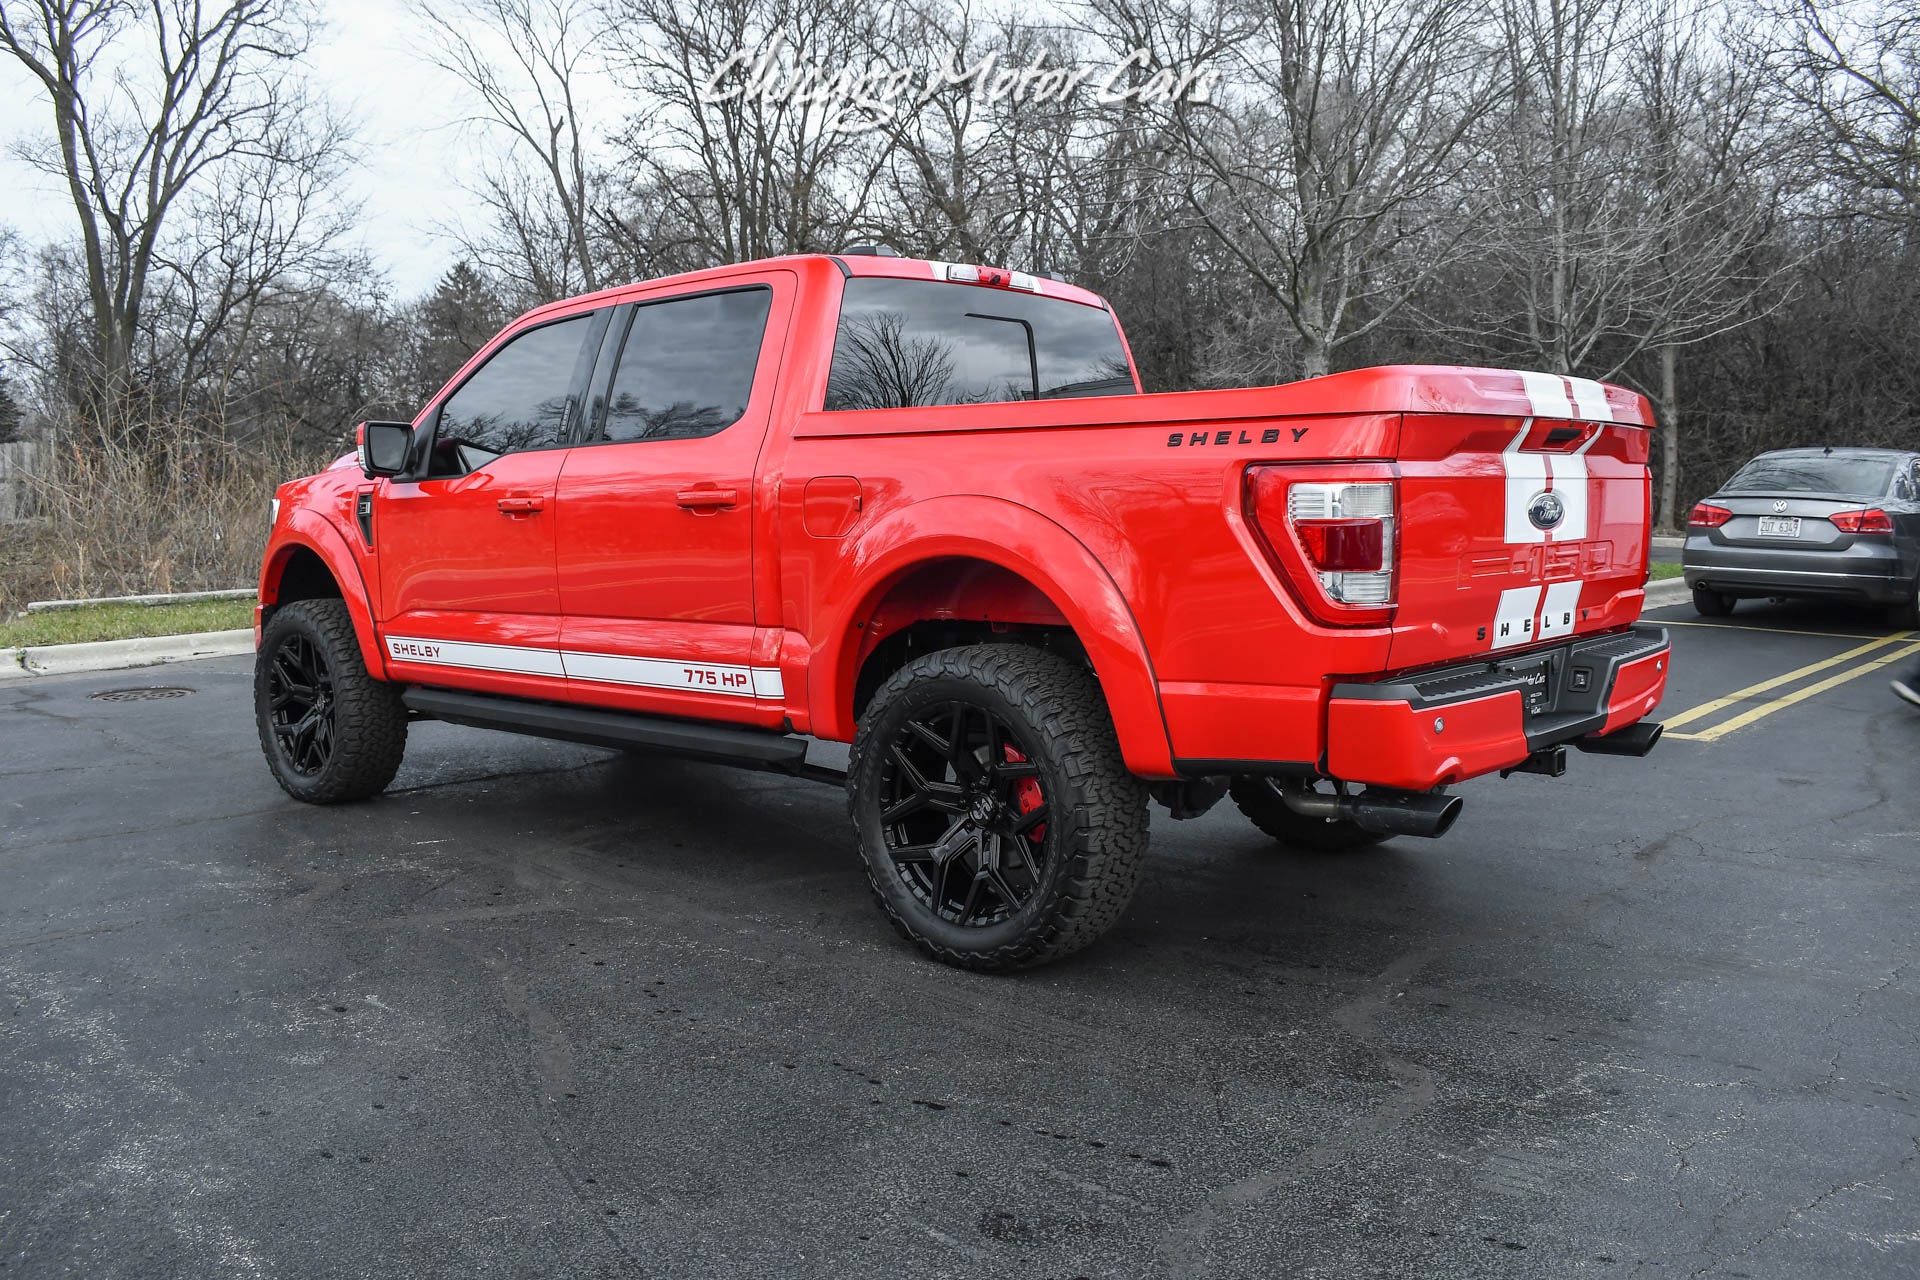 Used-2021-Ford-F-150-4X4-Supercrew-Lariat-Shelby-775HP-ONLY-1423-Miles-SUPER-RARE-LOADED